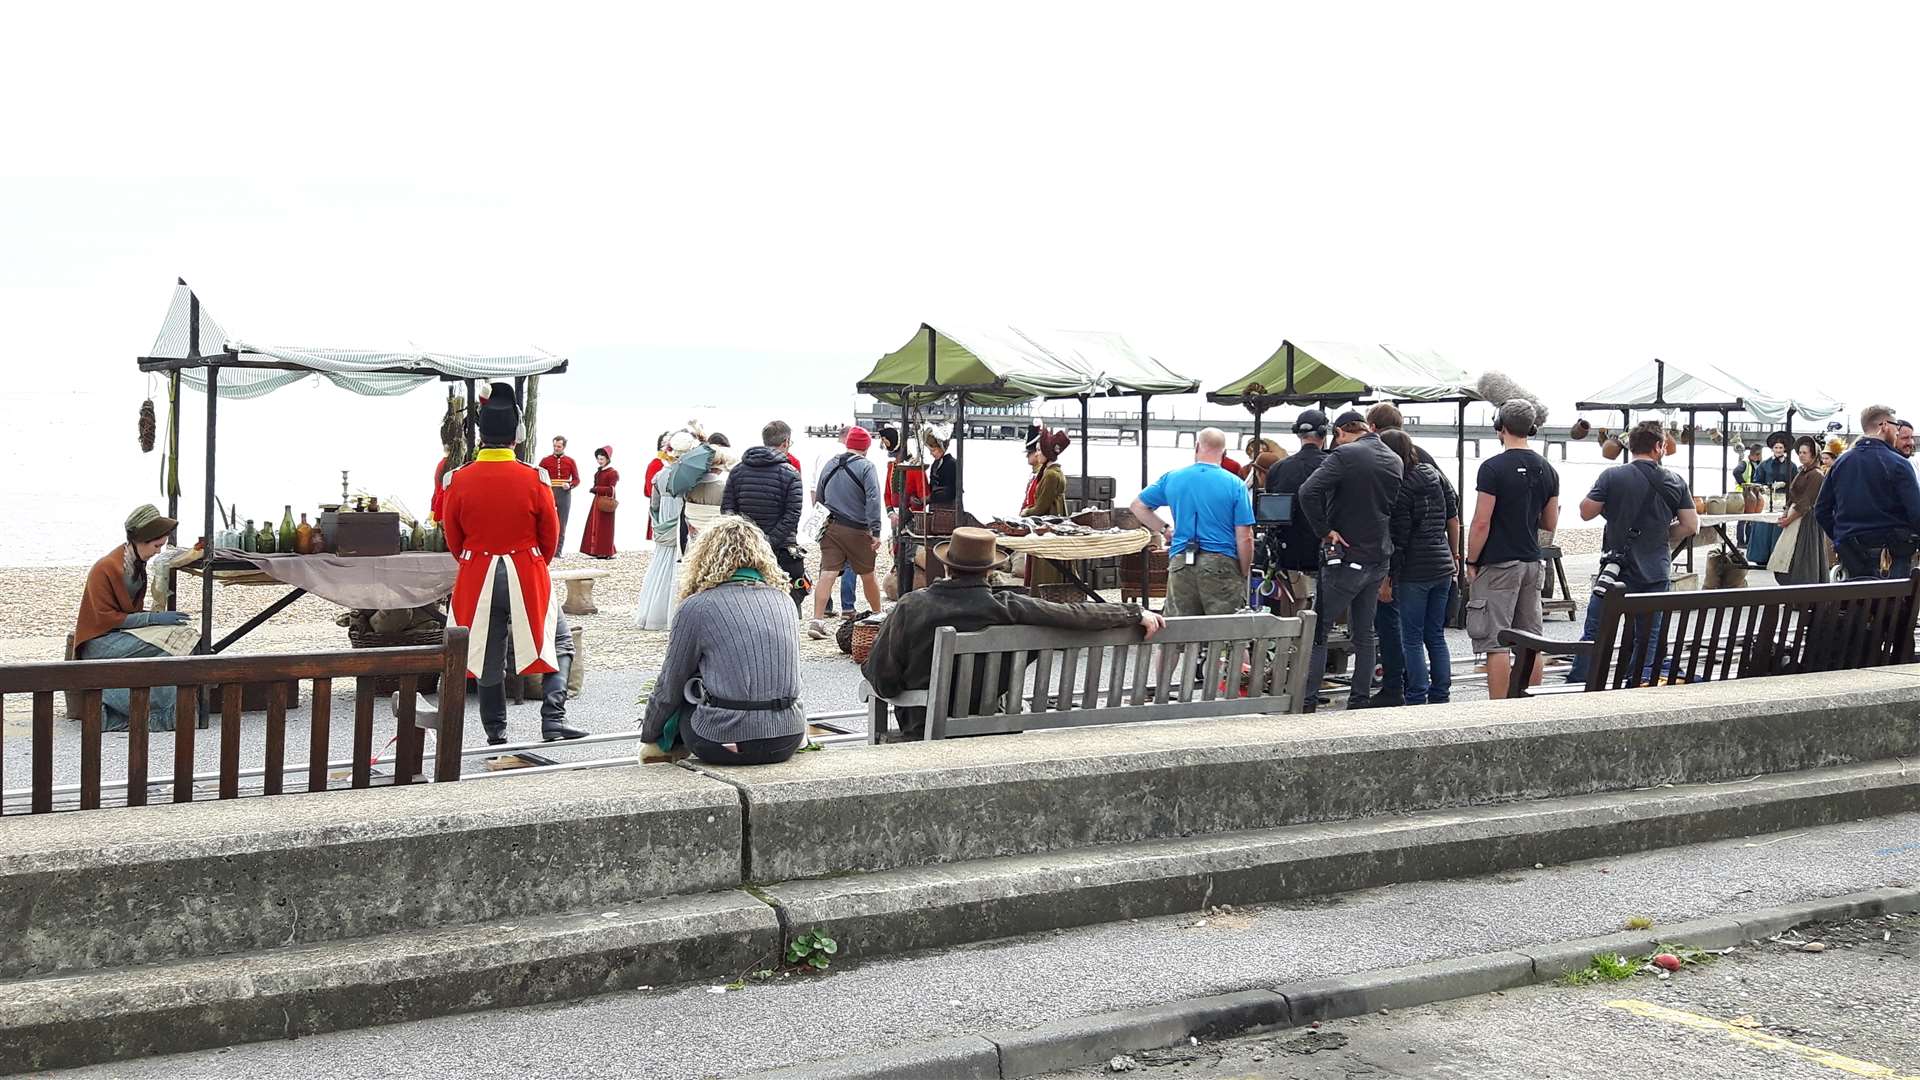 Filming is taking place on the promenade and beach